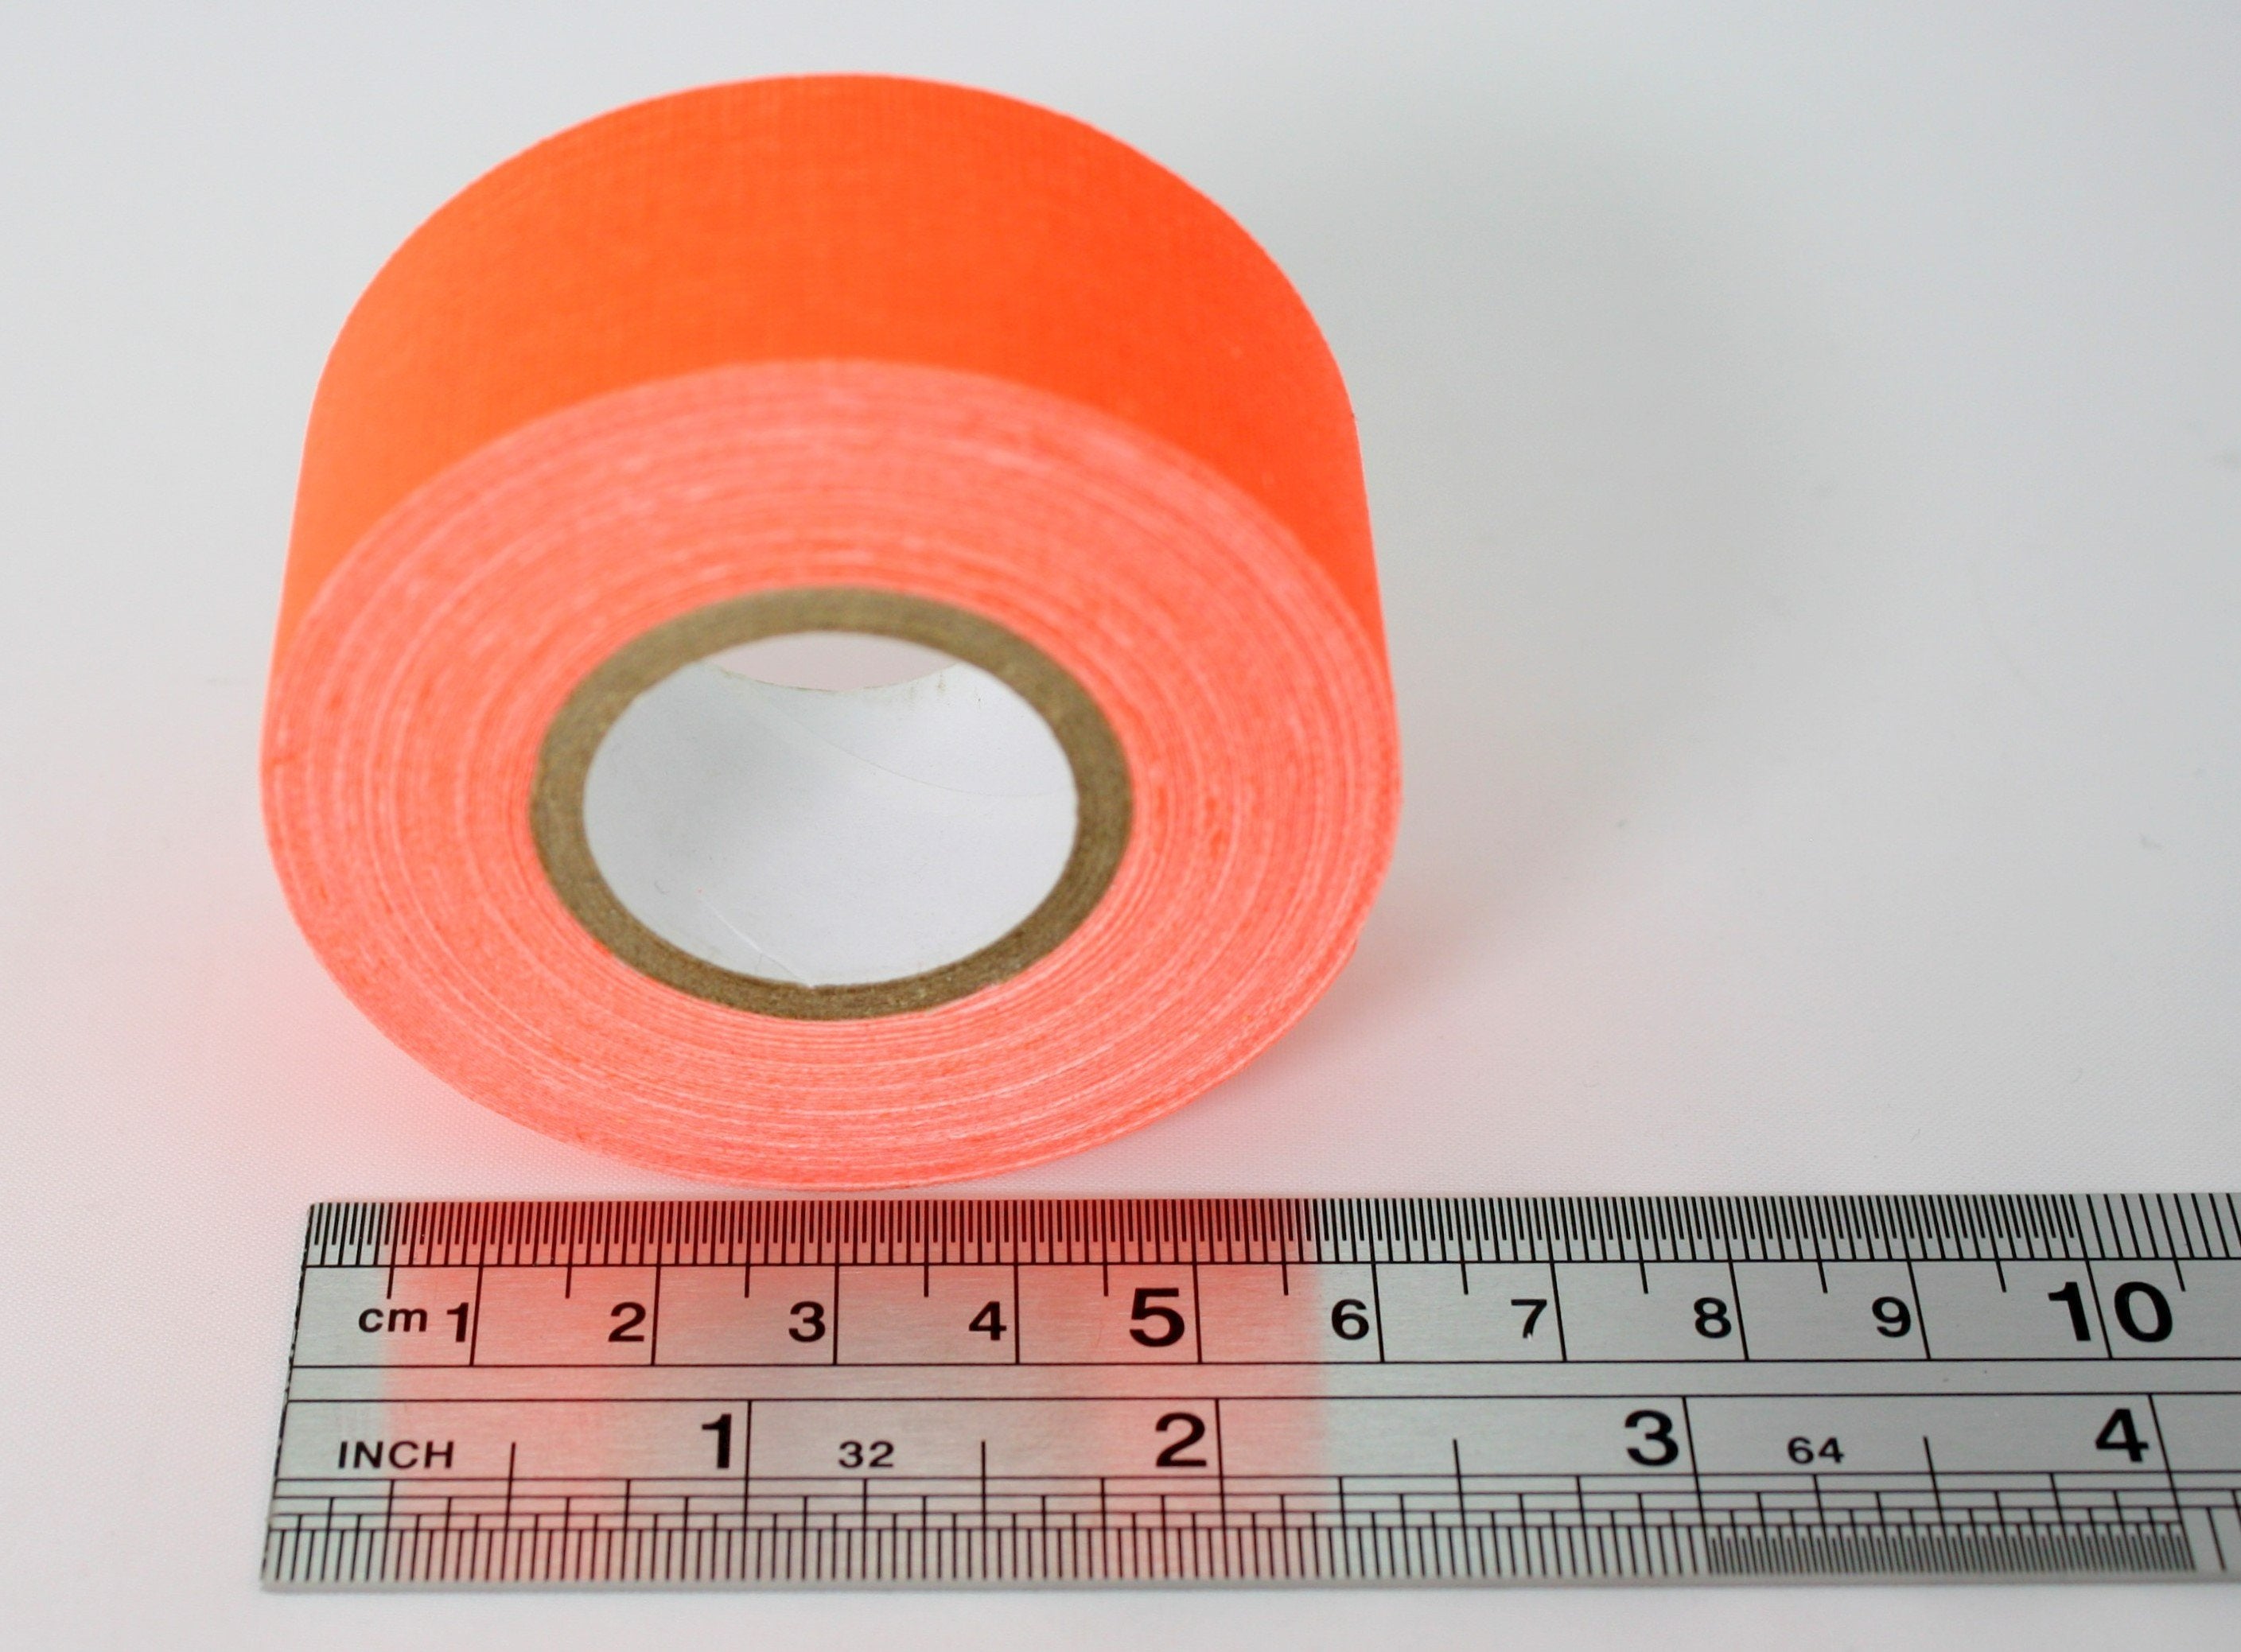 A close up of a single roll of Fluorescent Orange Micro Gaffer 1" tape, next to a metal ruler showing the width of the roll to be just over 6cm.